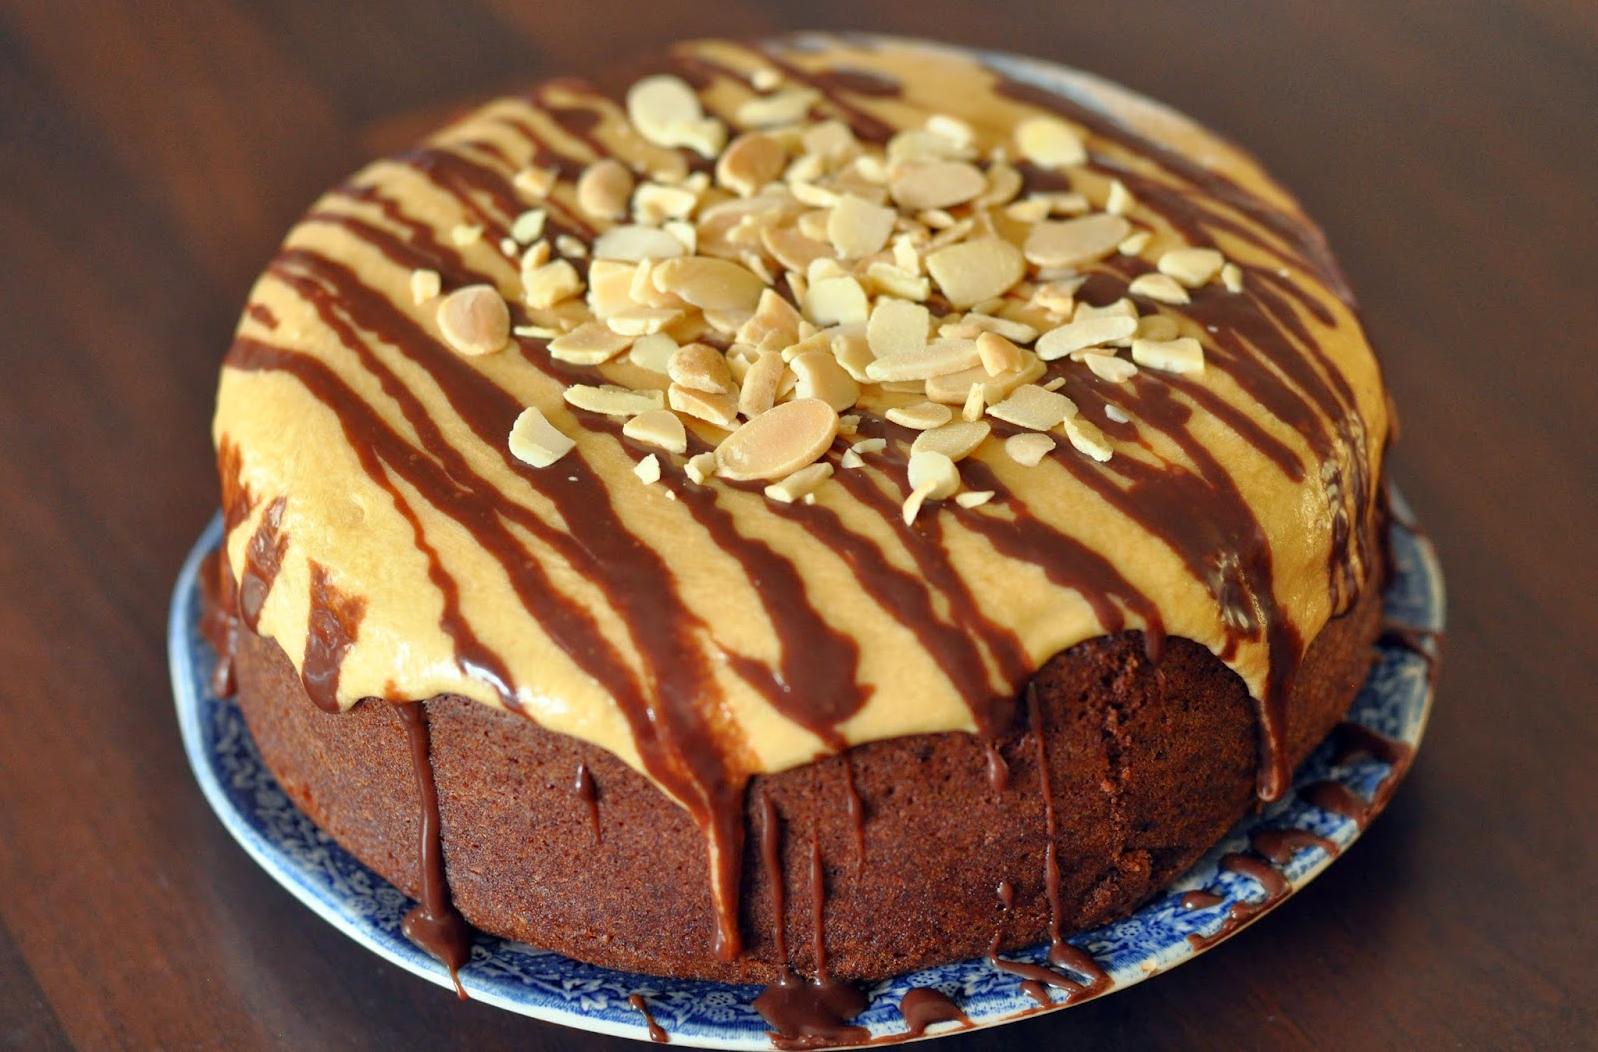  Layers of chocolate and almond goodness.